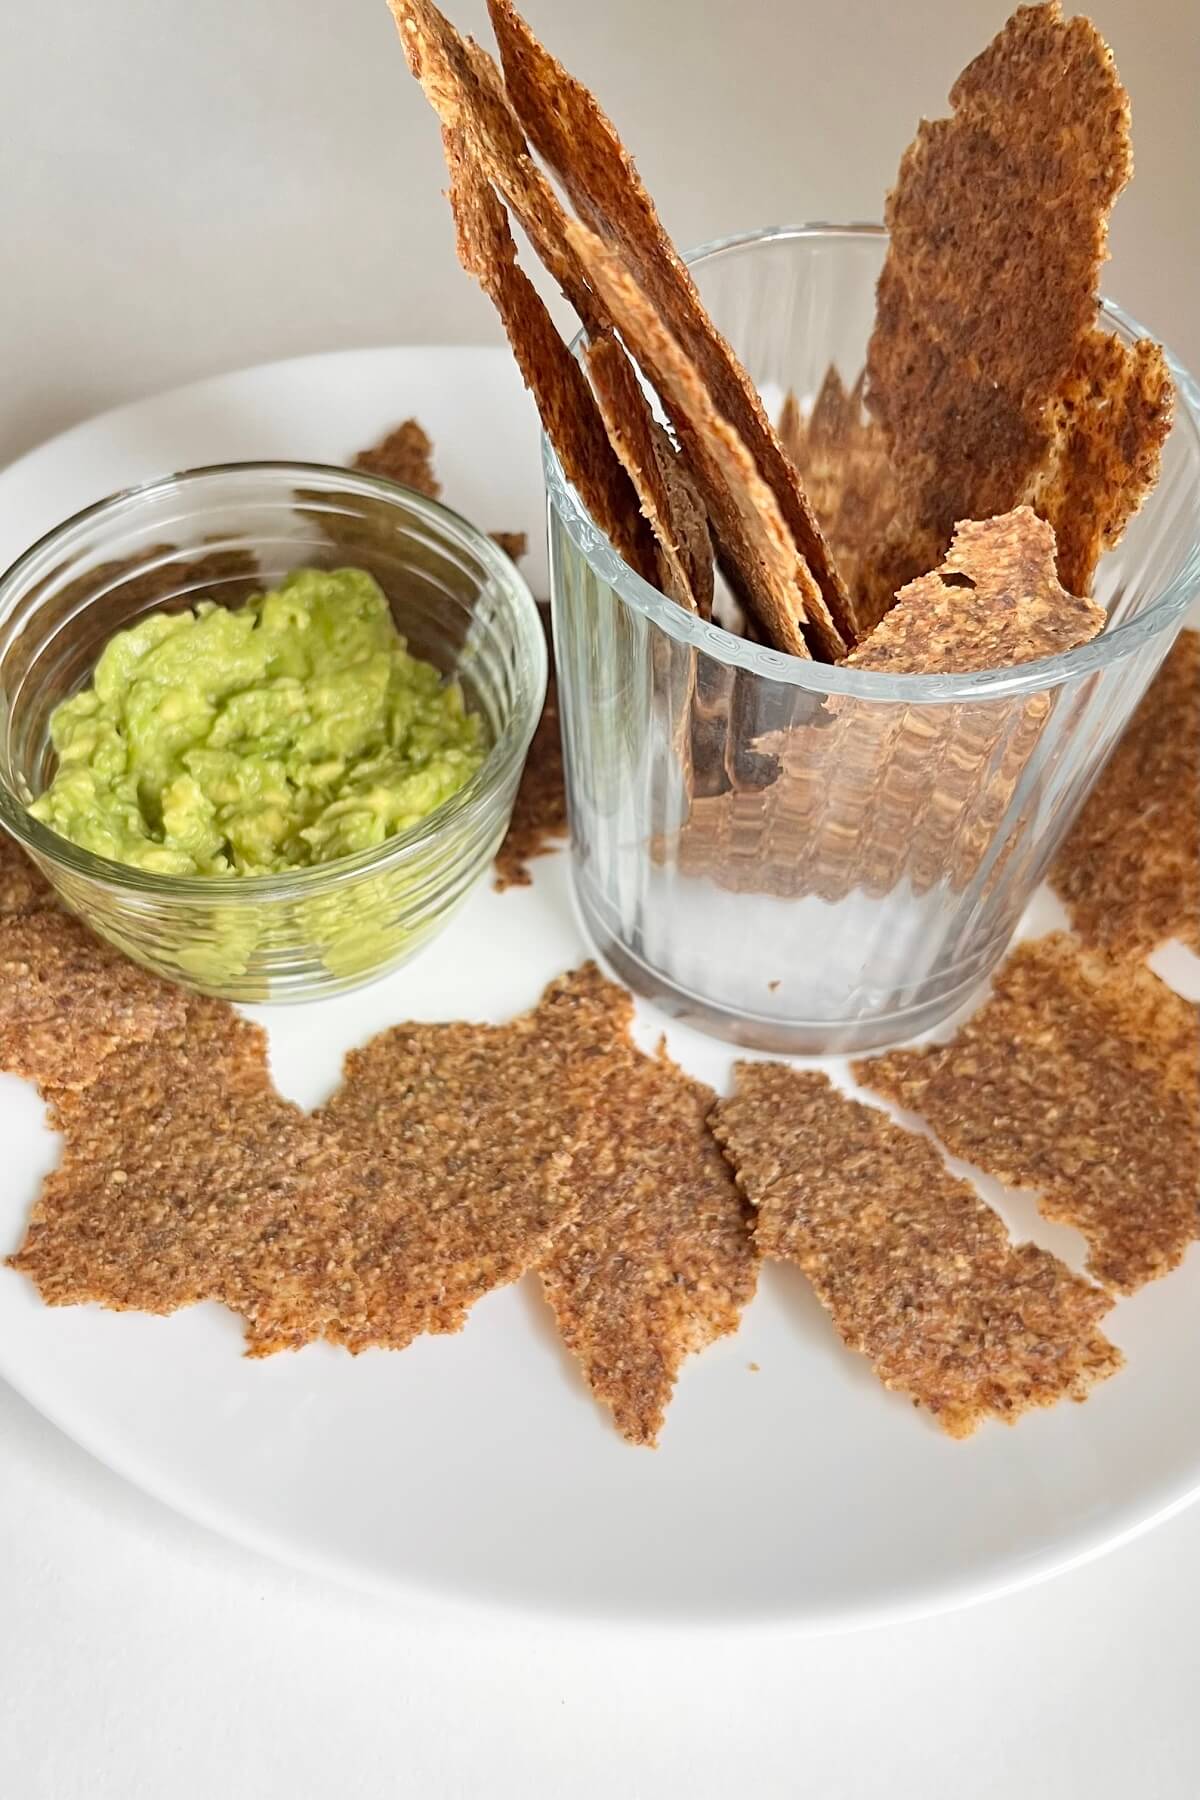 Flax crackers next to a glass dish of guacamole.